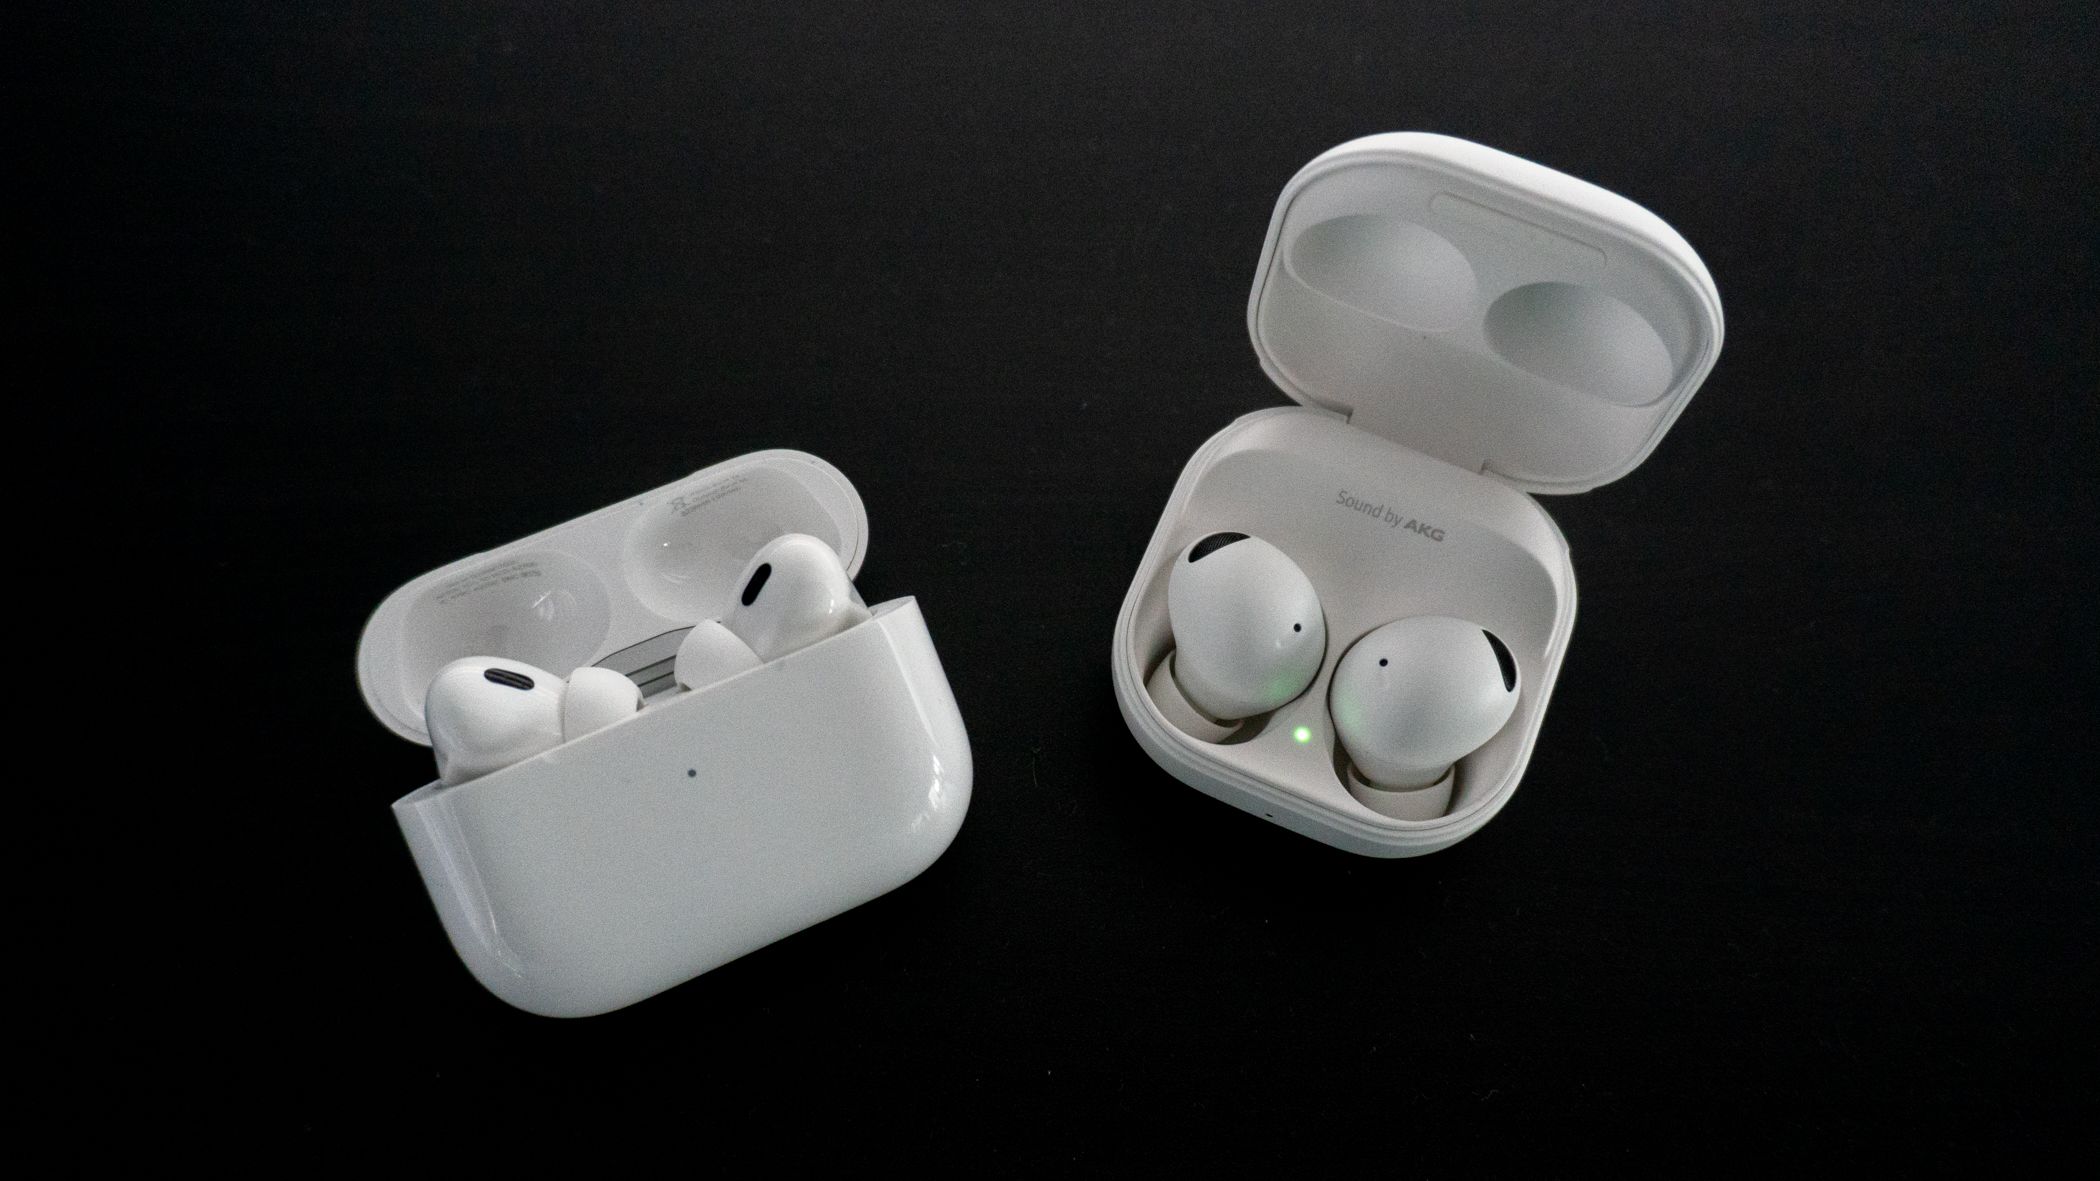 I tried AirPods Pro and Galaxy Buds Pro for 2 weeks. Here's the